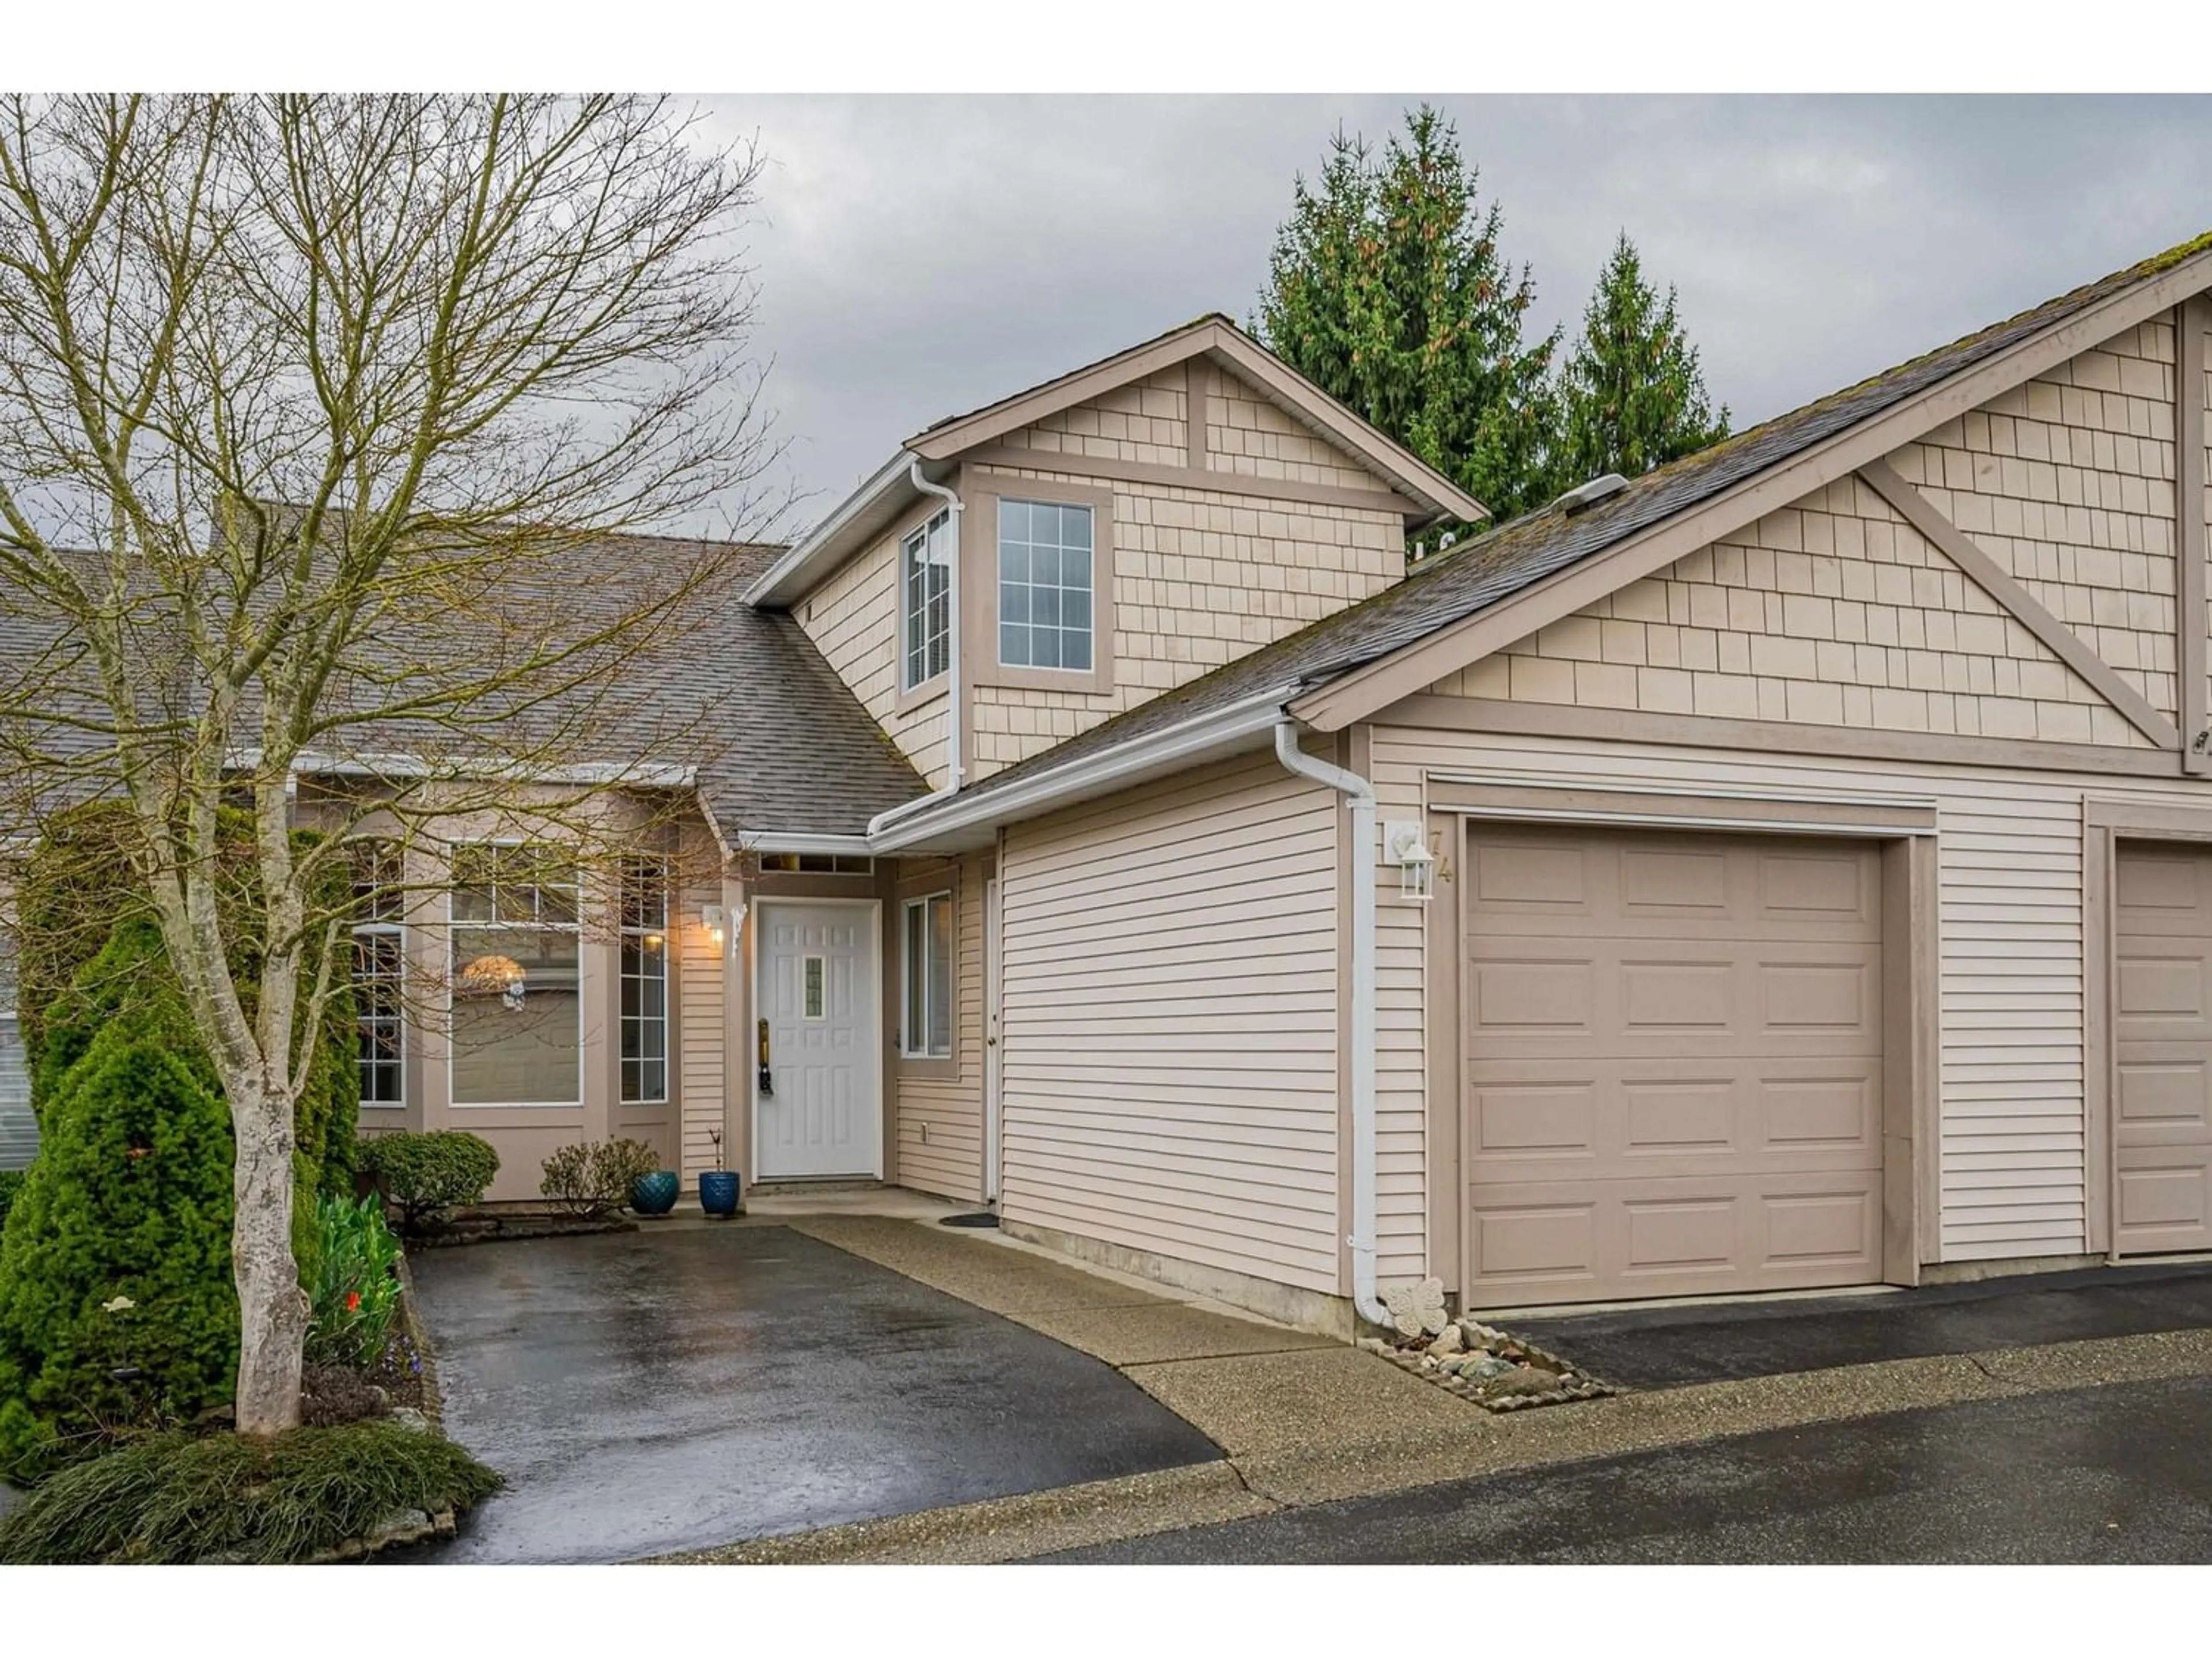 A pic from exterior of the house or condo for 74 9012 WALNUT GROVE DRIVE, Langley British Columbia V1M2K3